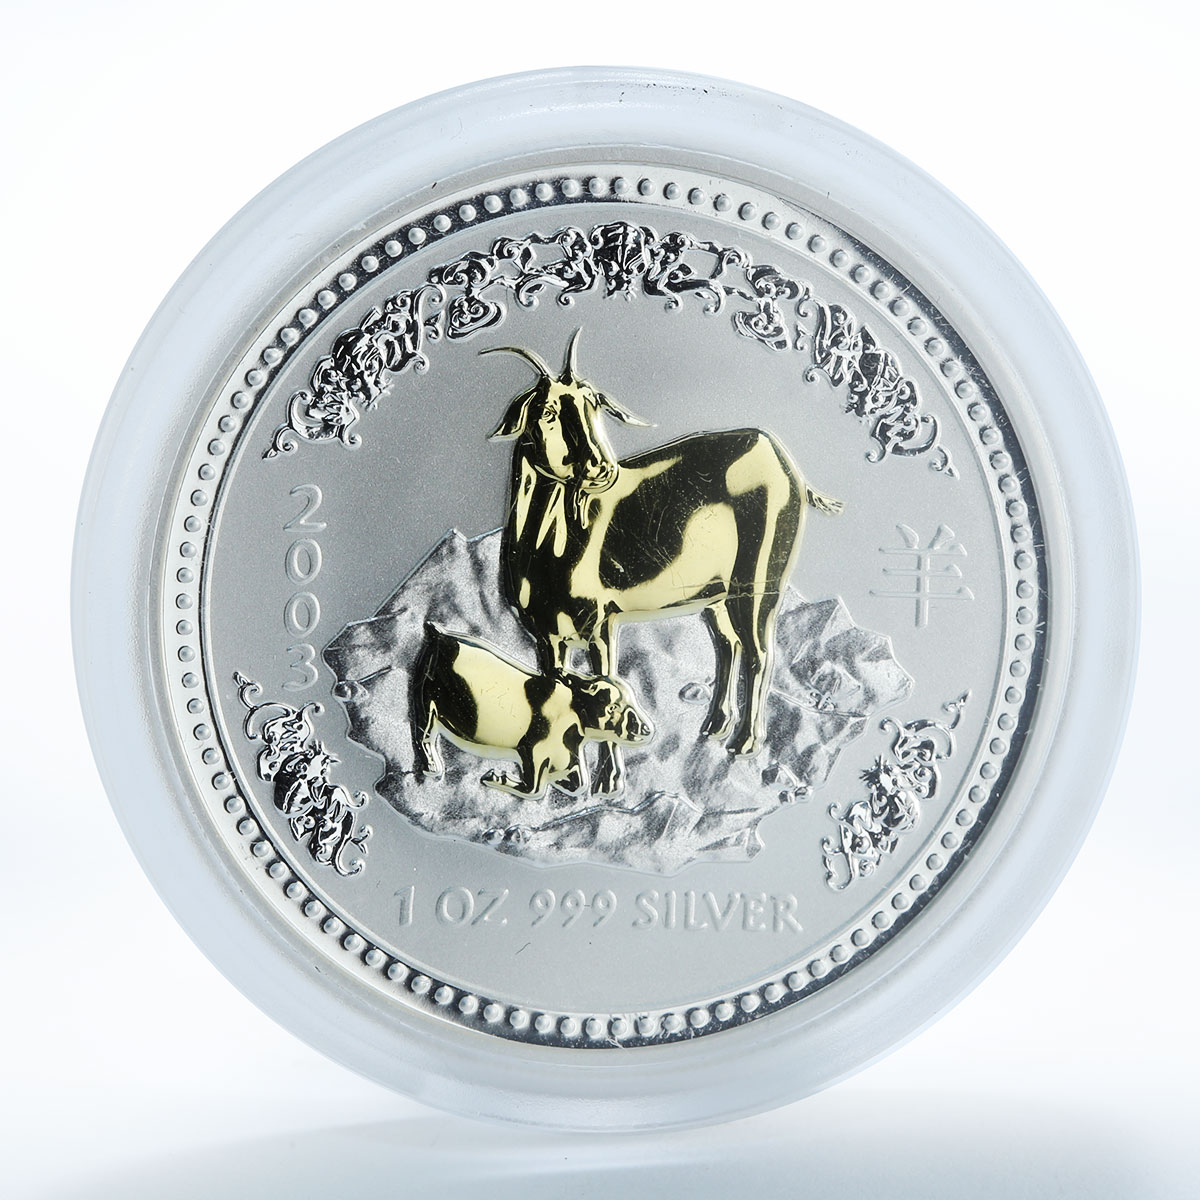 Australia $1 Year of the Goat Series I Lunar 1-oz Silver Gilded Coin 2003